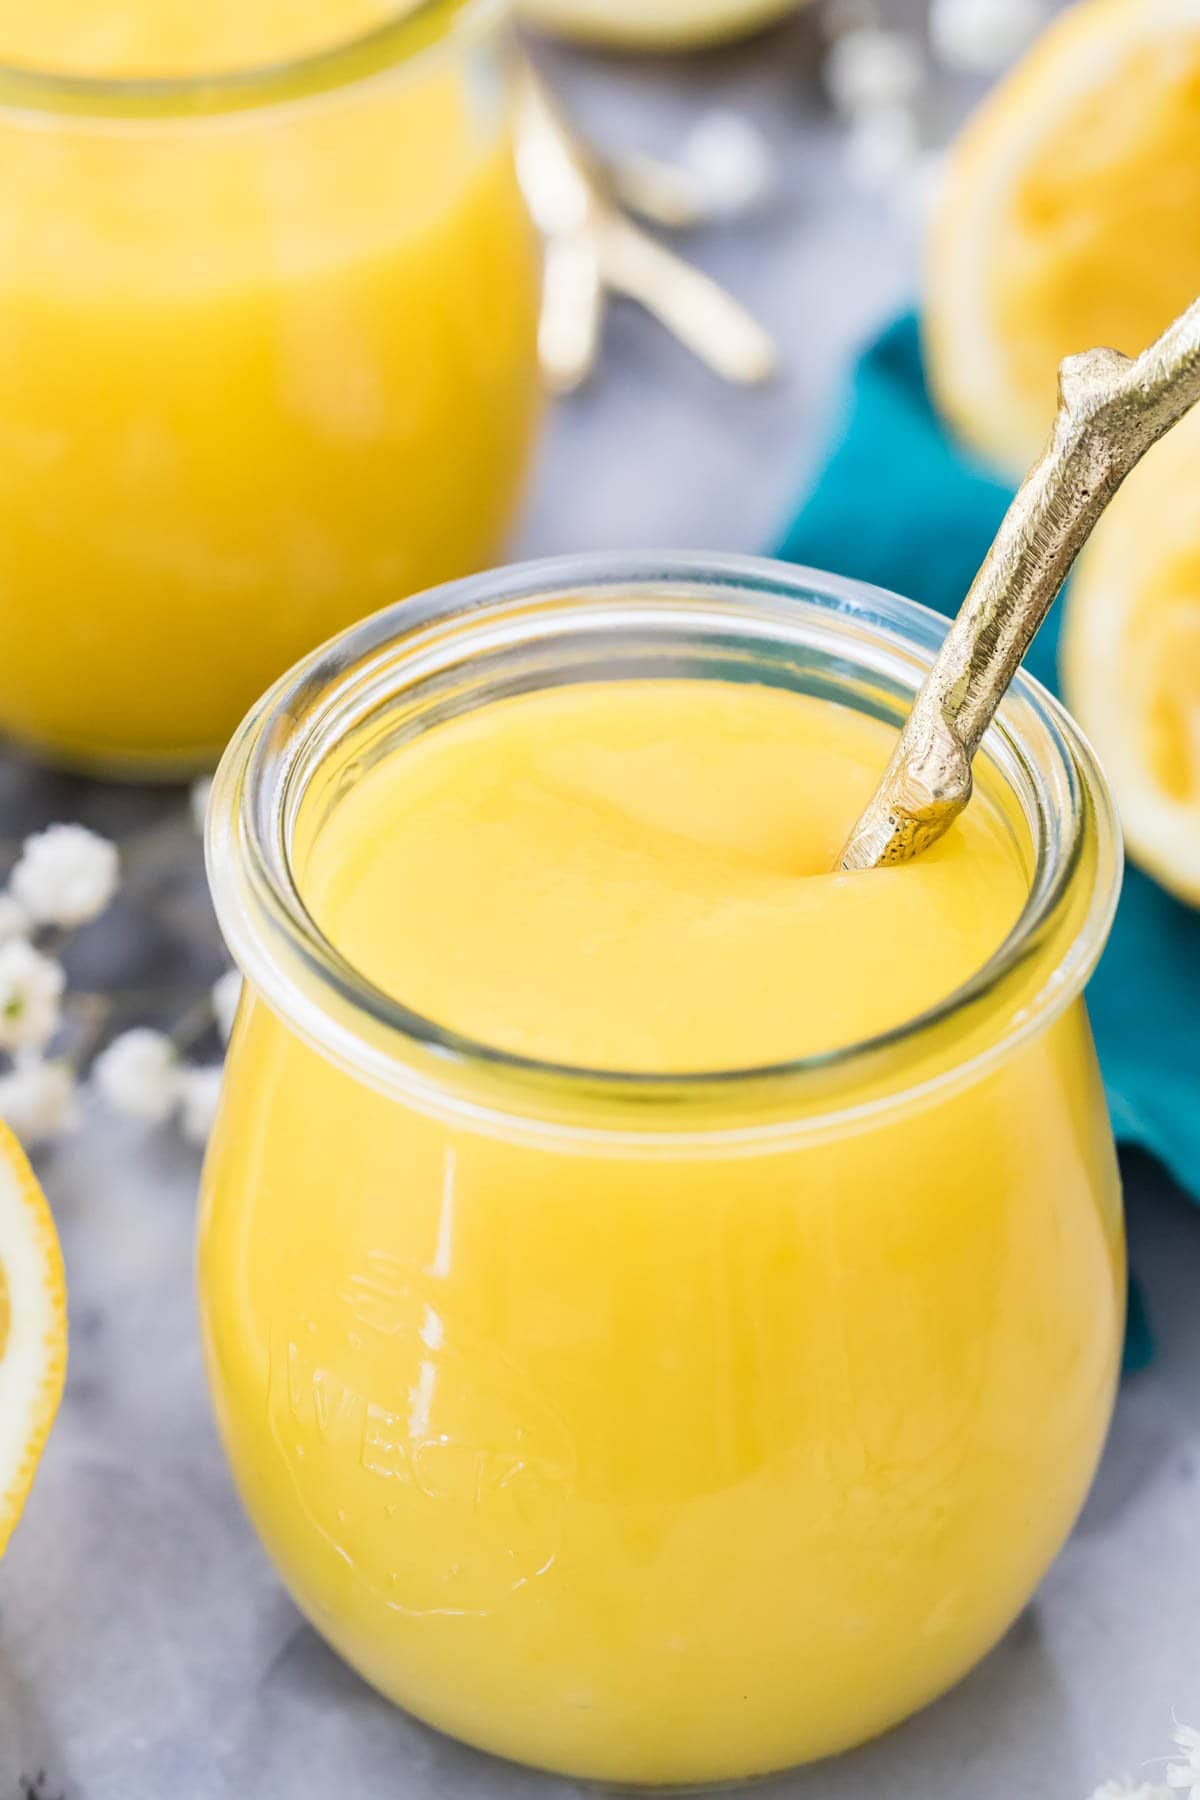 close-up view of a glass jar filled with bright yellow curd with a spoon dipped into it